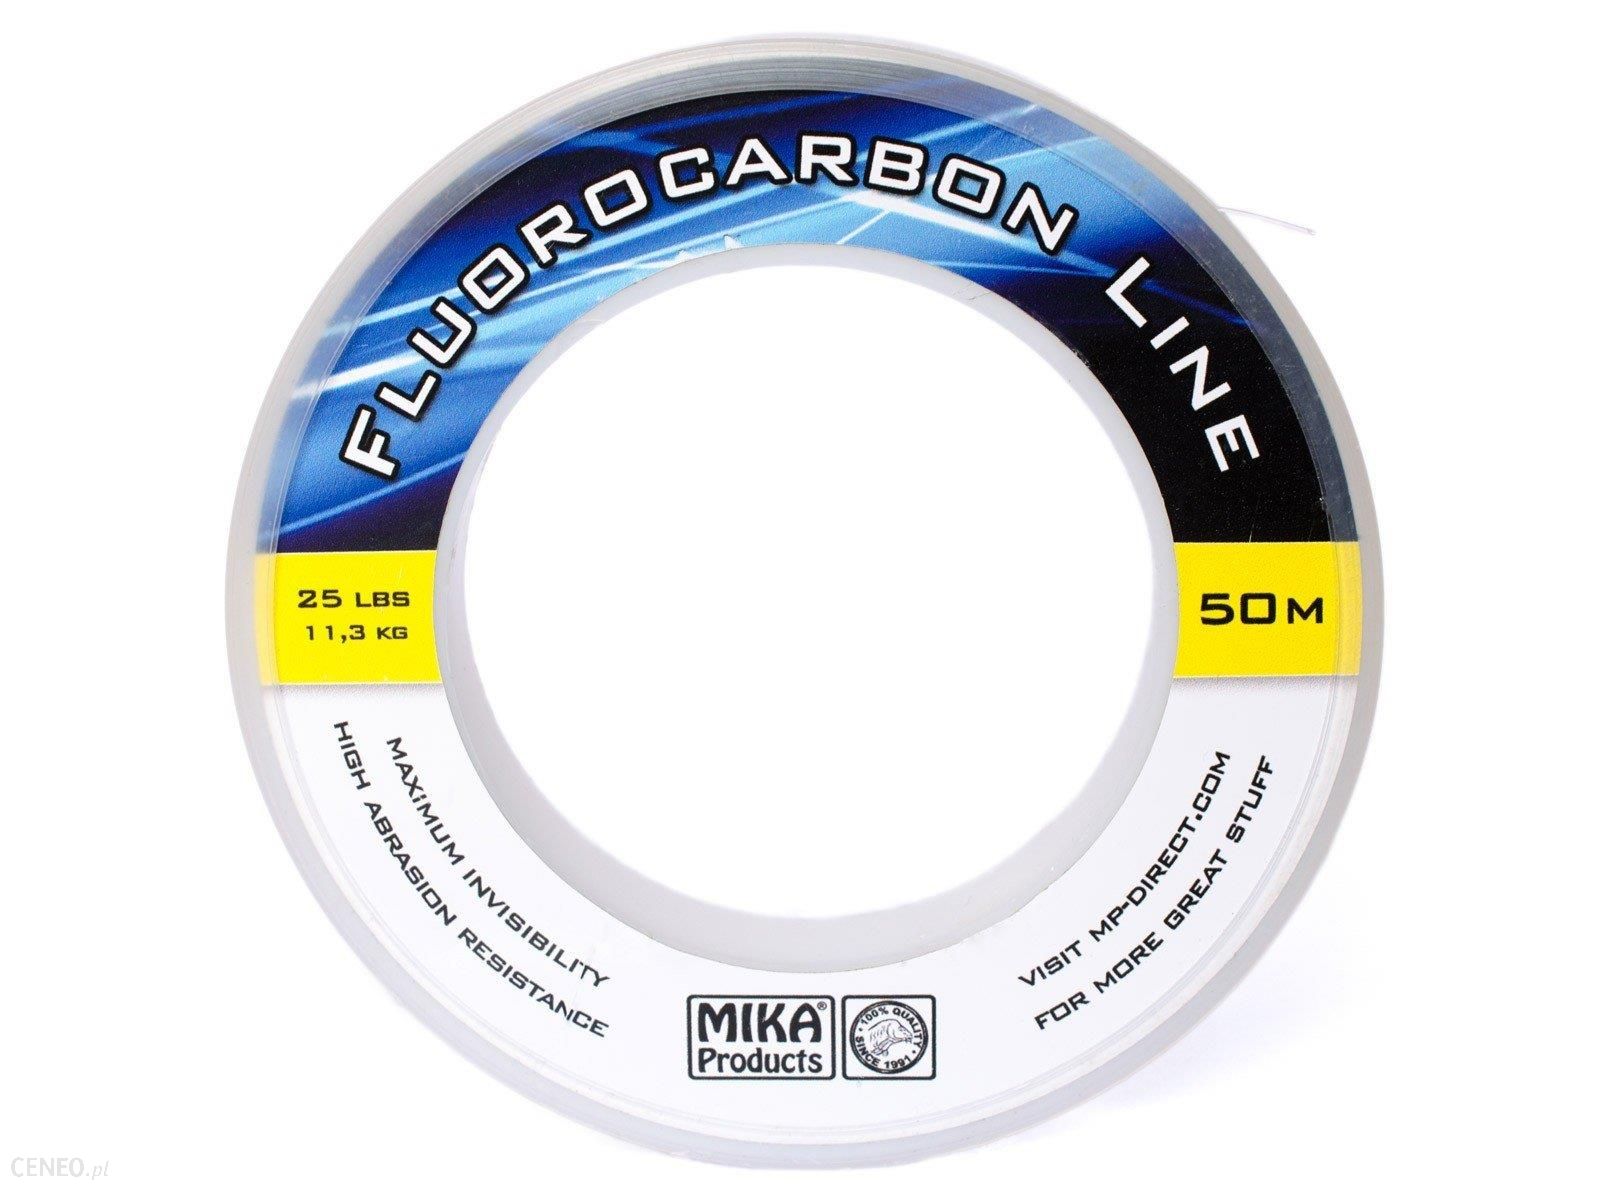 Mika Products Fluorocarbon 35 Lbs 50M